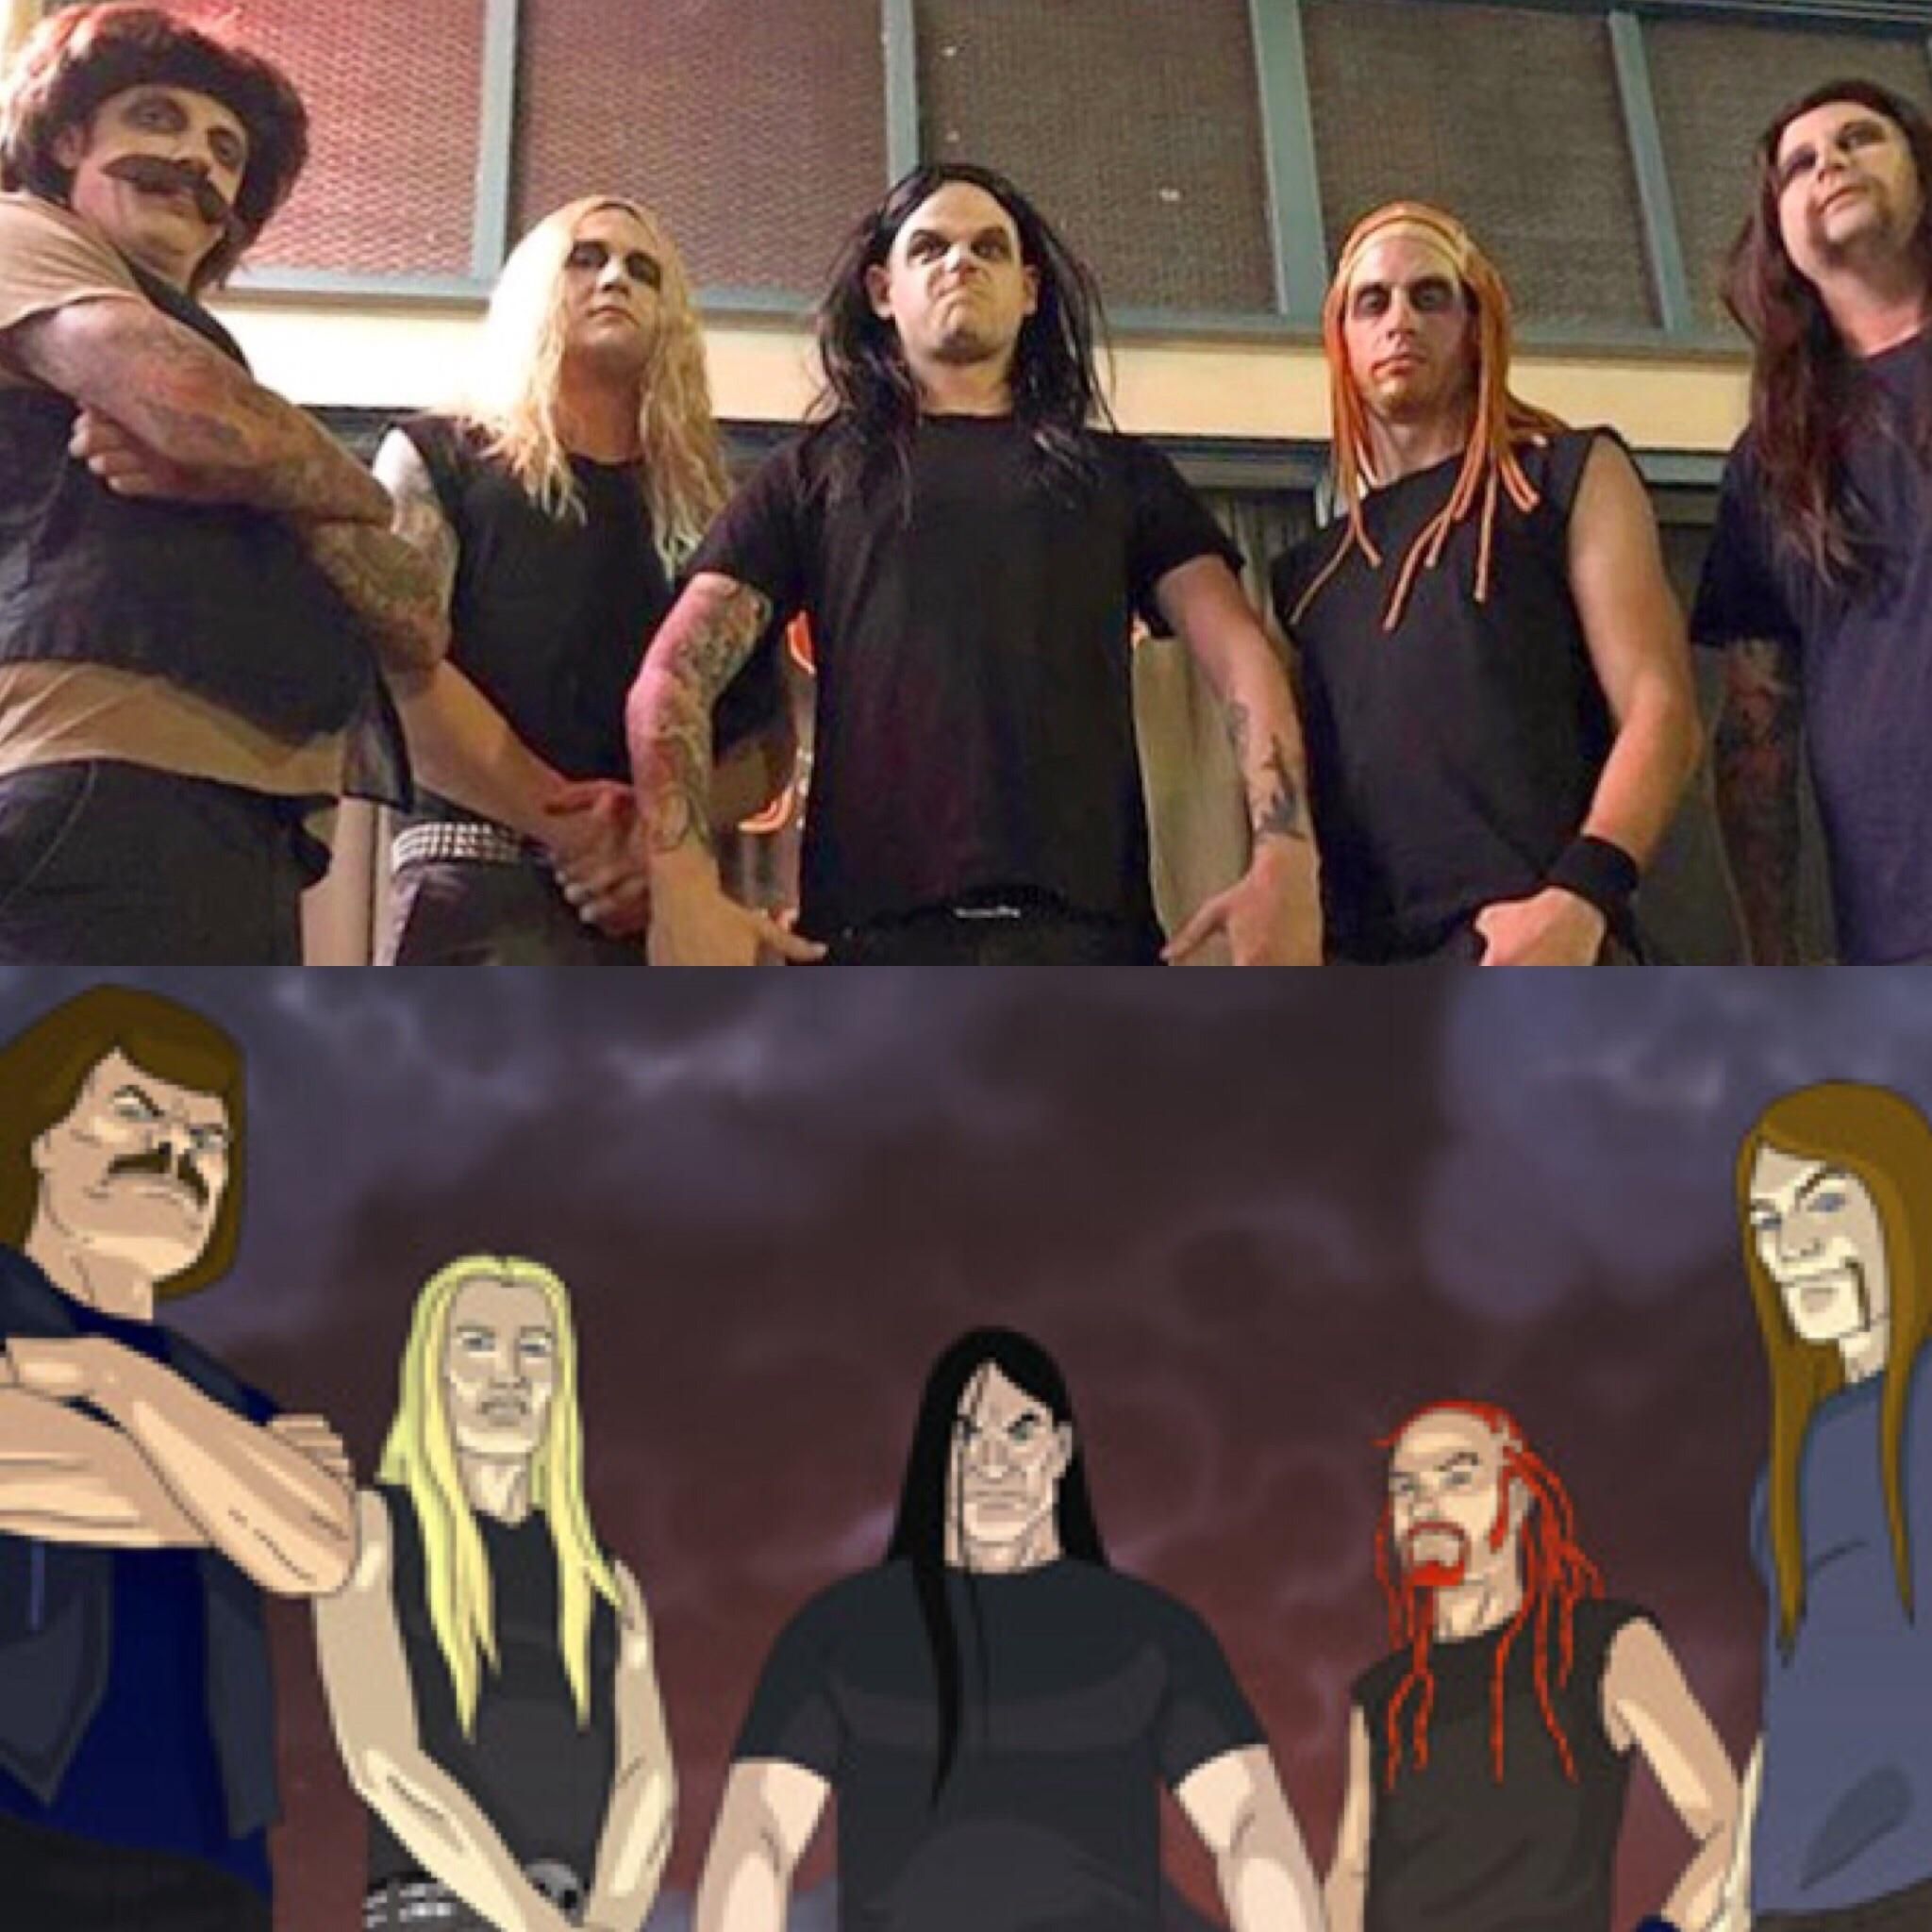 I’m in a metal band. Here is this year’s group costume.